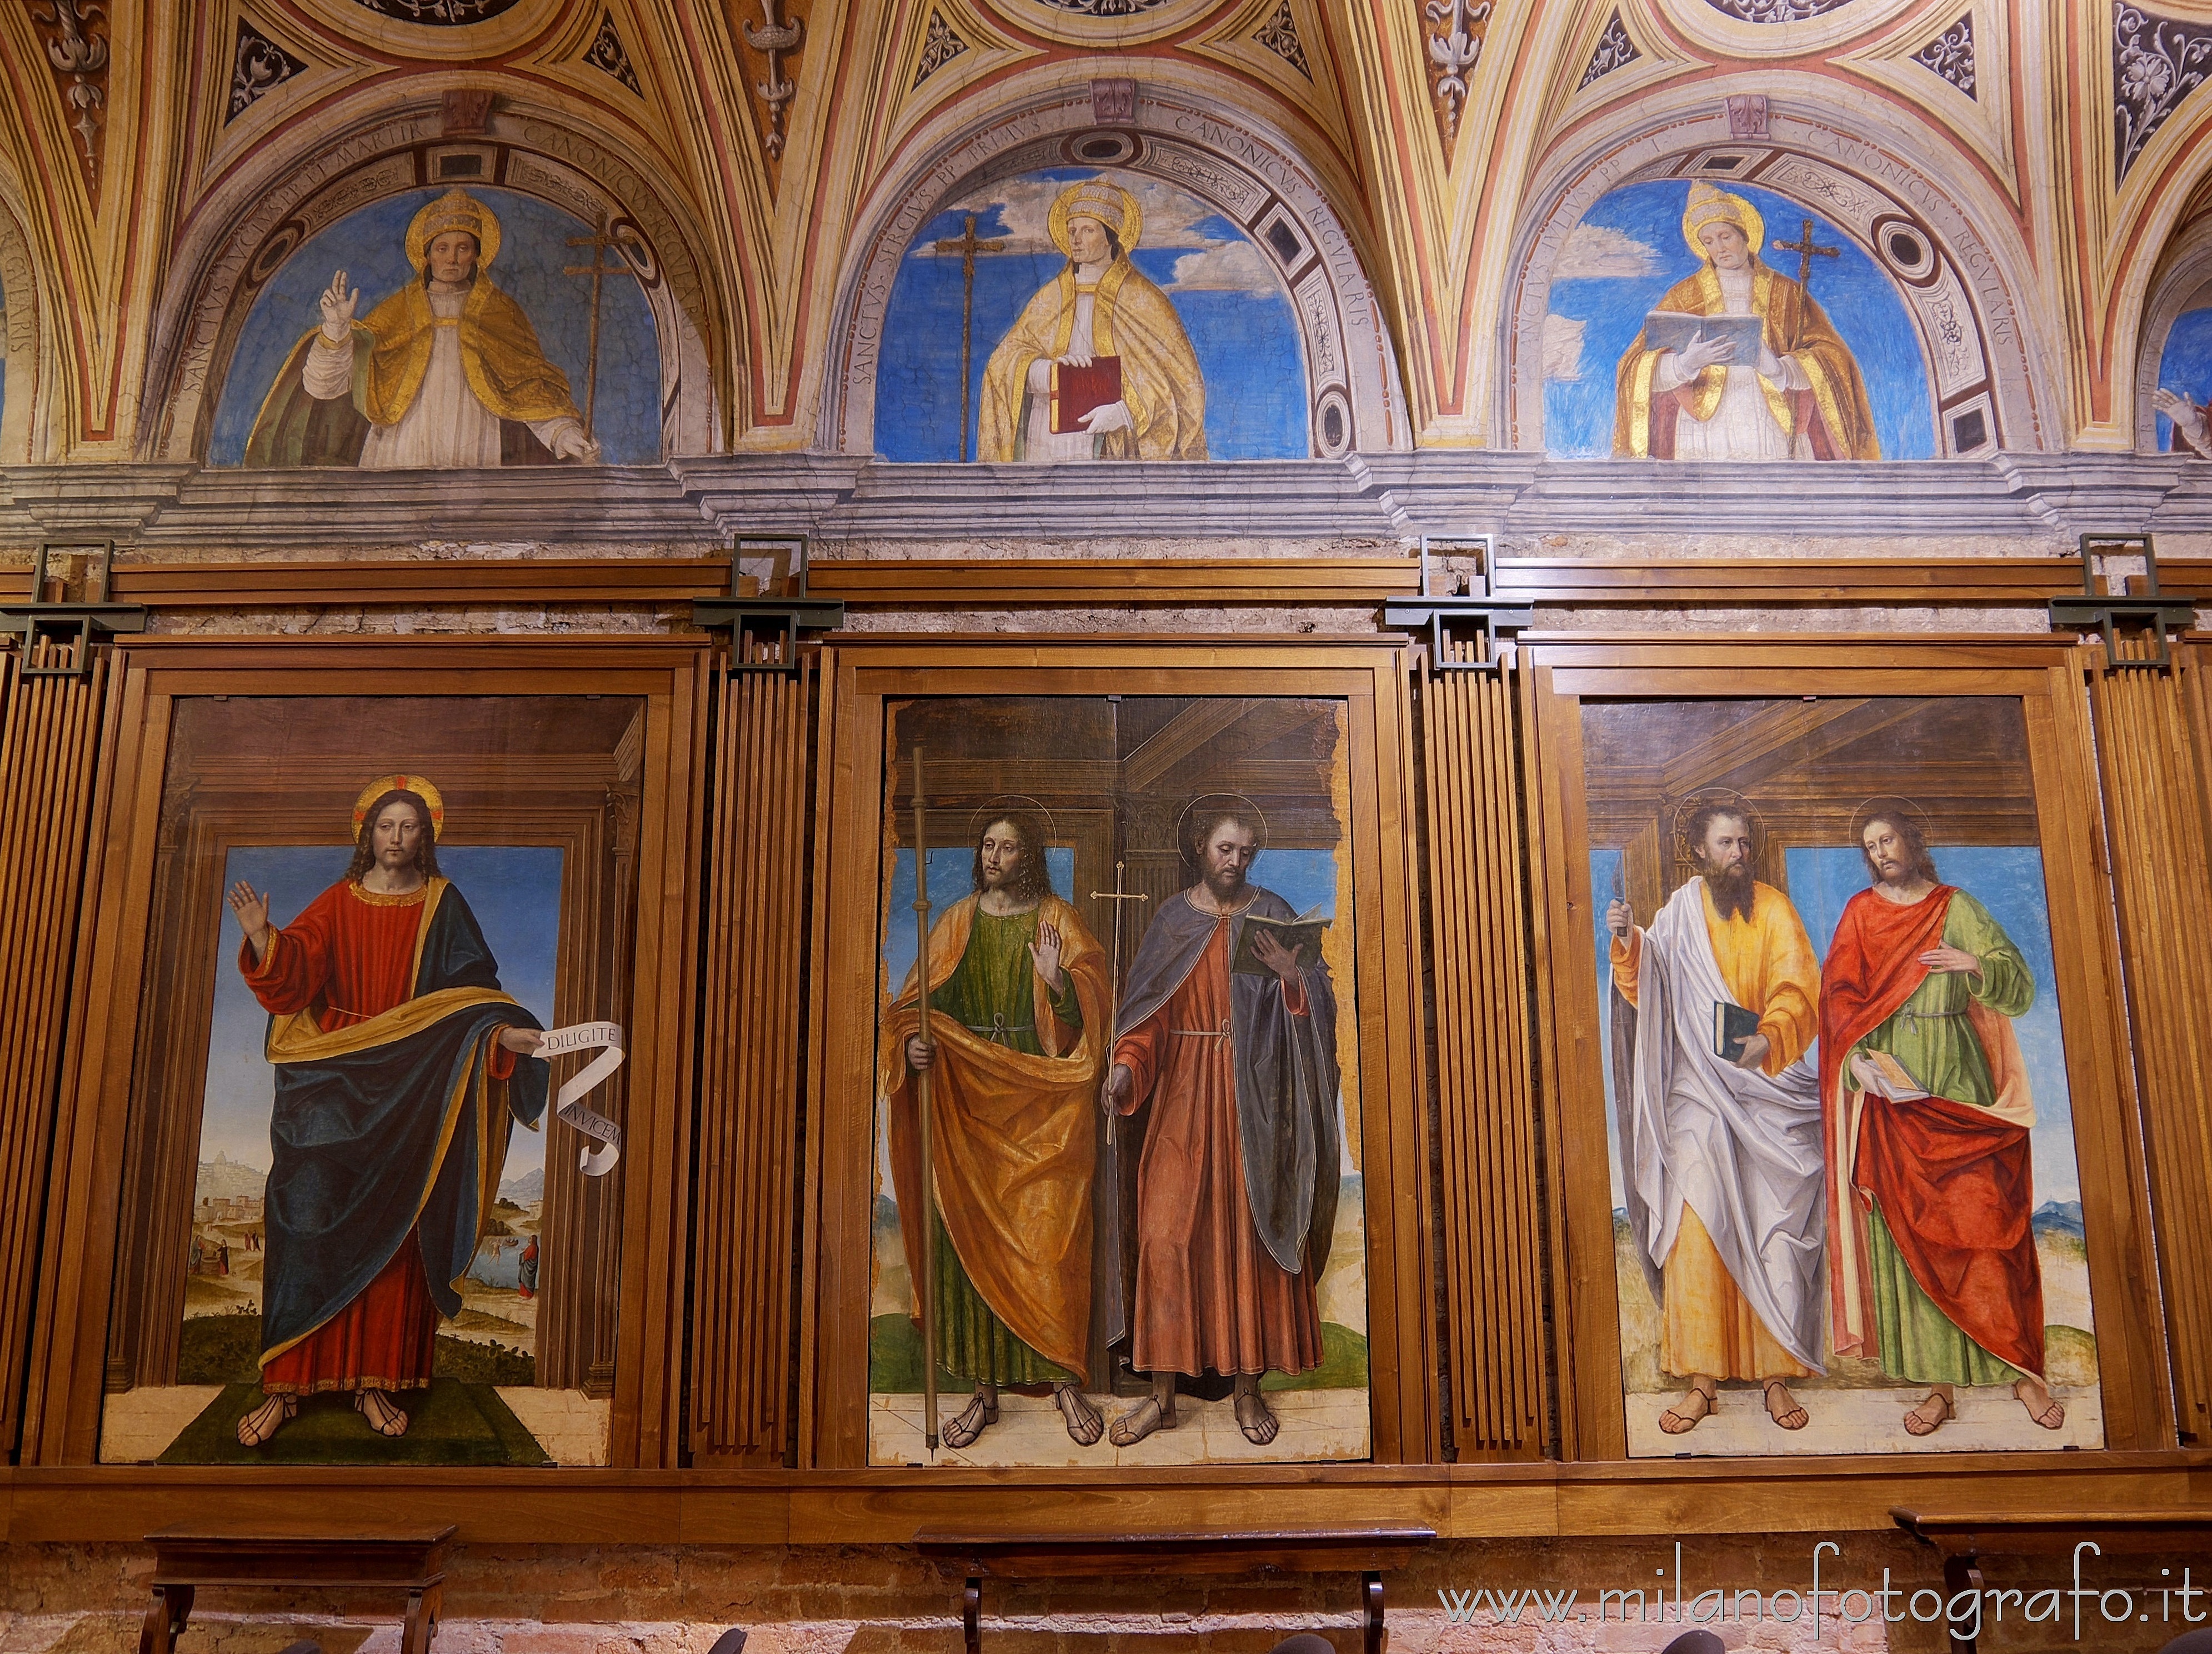 Milan (Italy): Frescoes by Bergognone in the capitular room of the Church of Santa Maria della Passione - Milan (Italy)